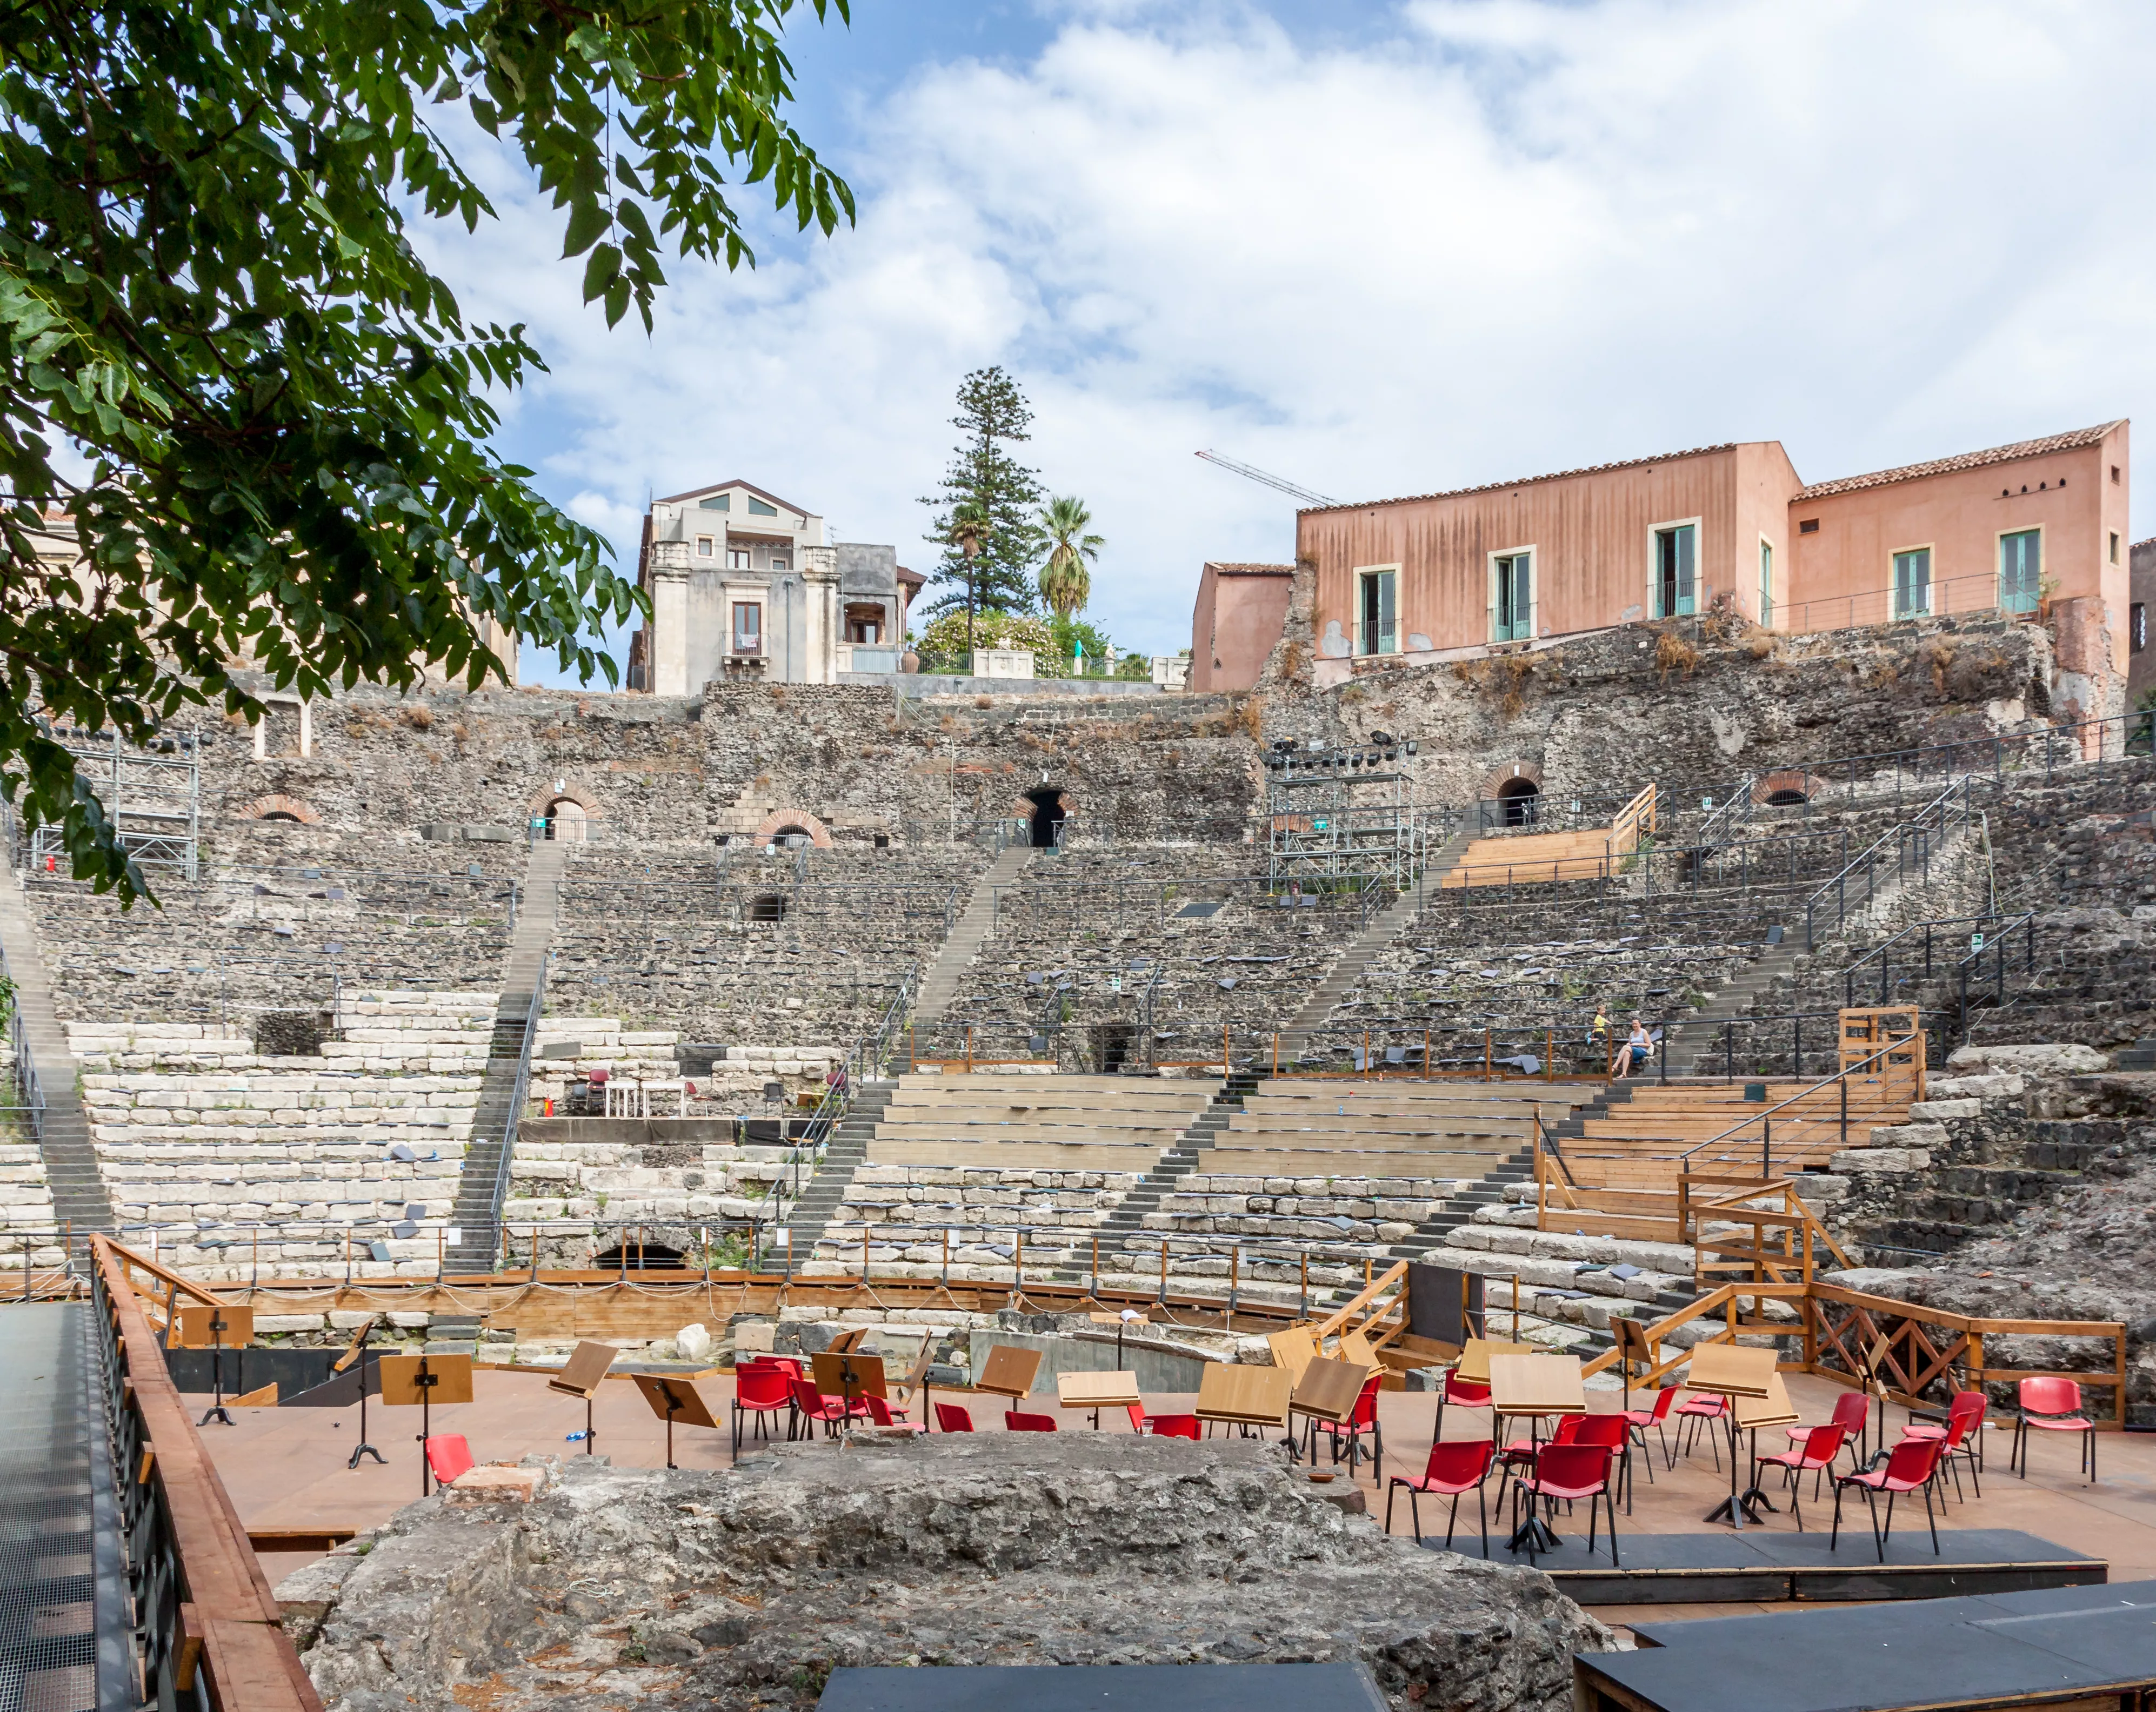 Roman Amphitheater of Catania in Italy, Europe | Excavations - Rated 3.5